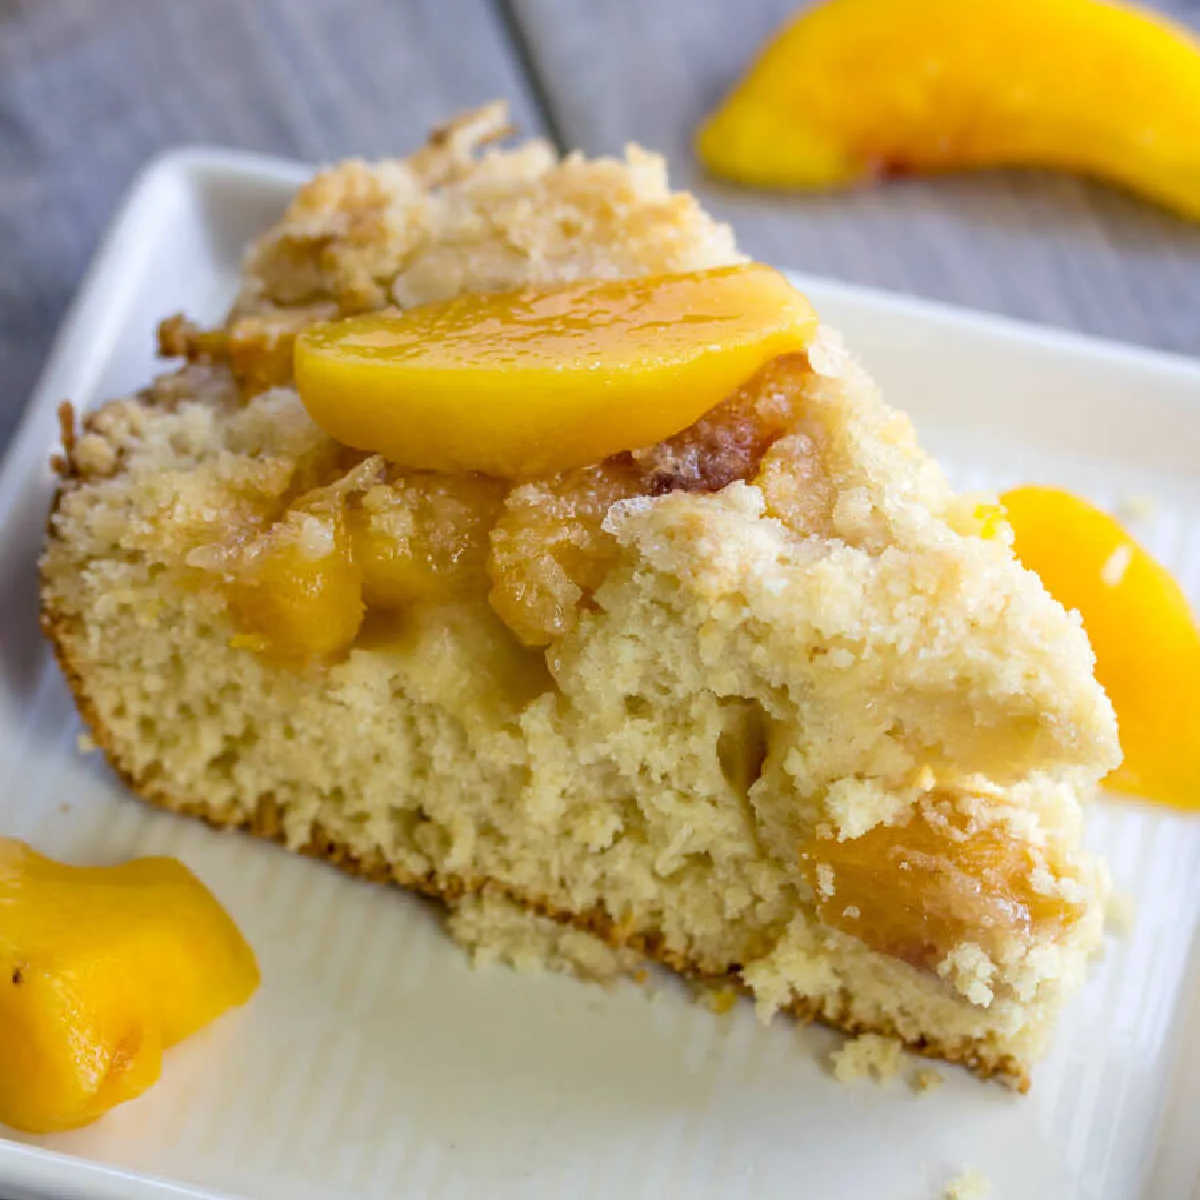 Slice of peach coffee cake with crumb topping served with extra peach slices.